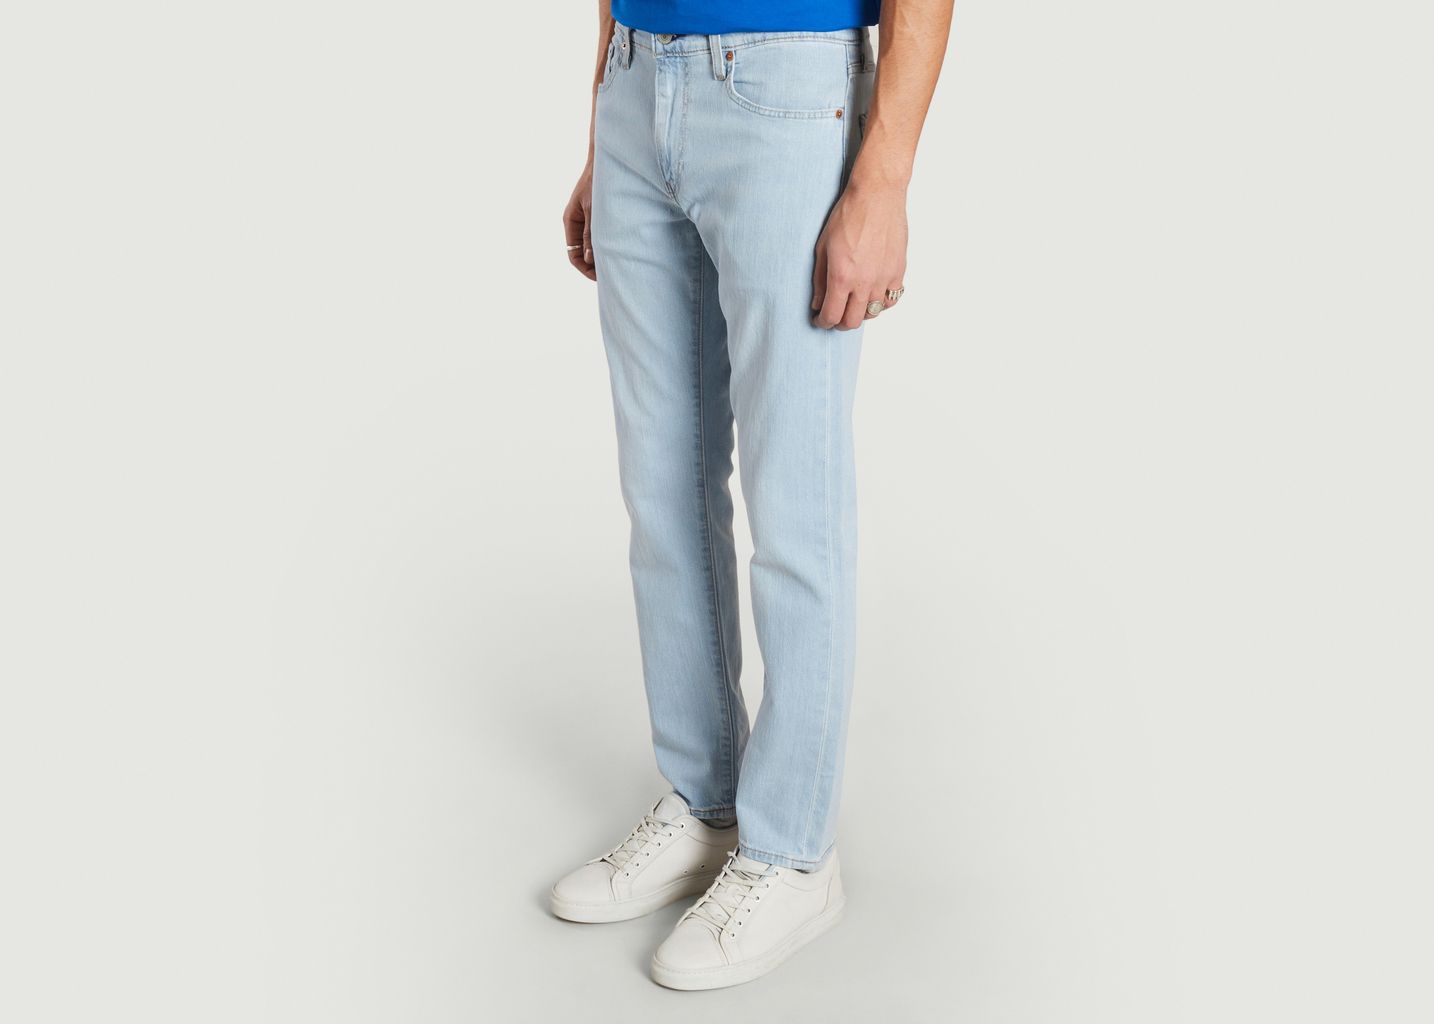 Levi's 502™ Tapered Jeans - Levi's Red Tab